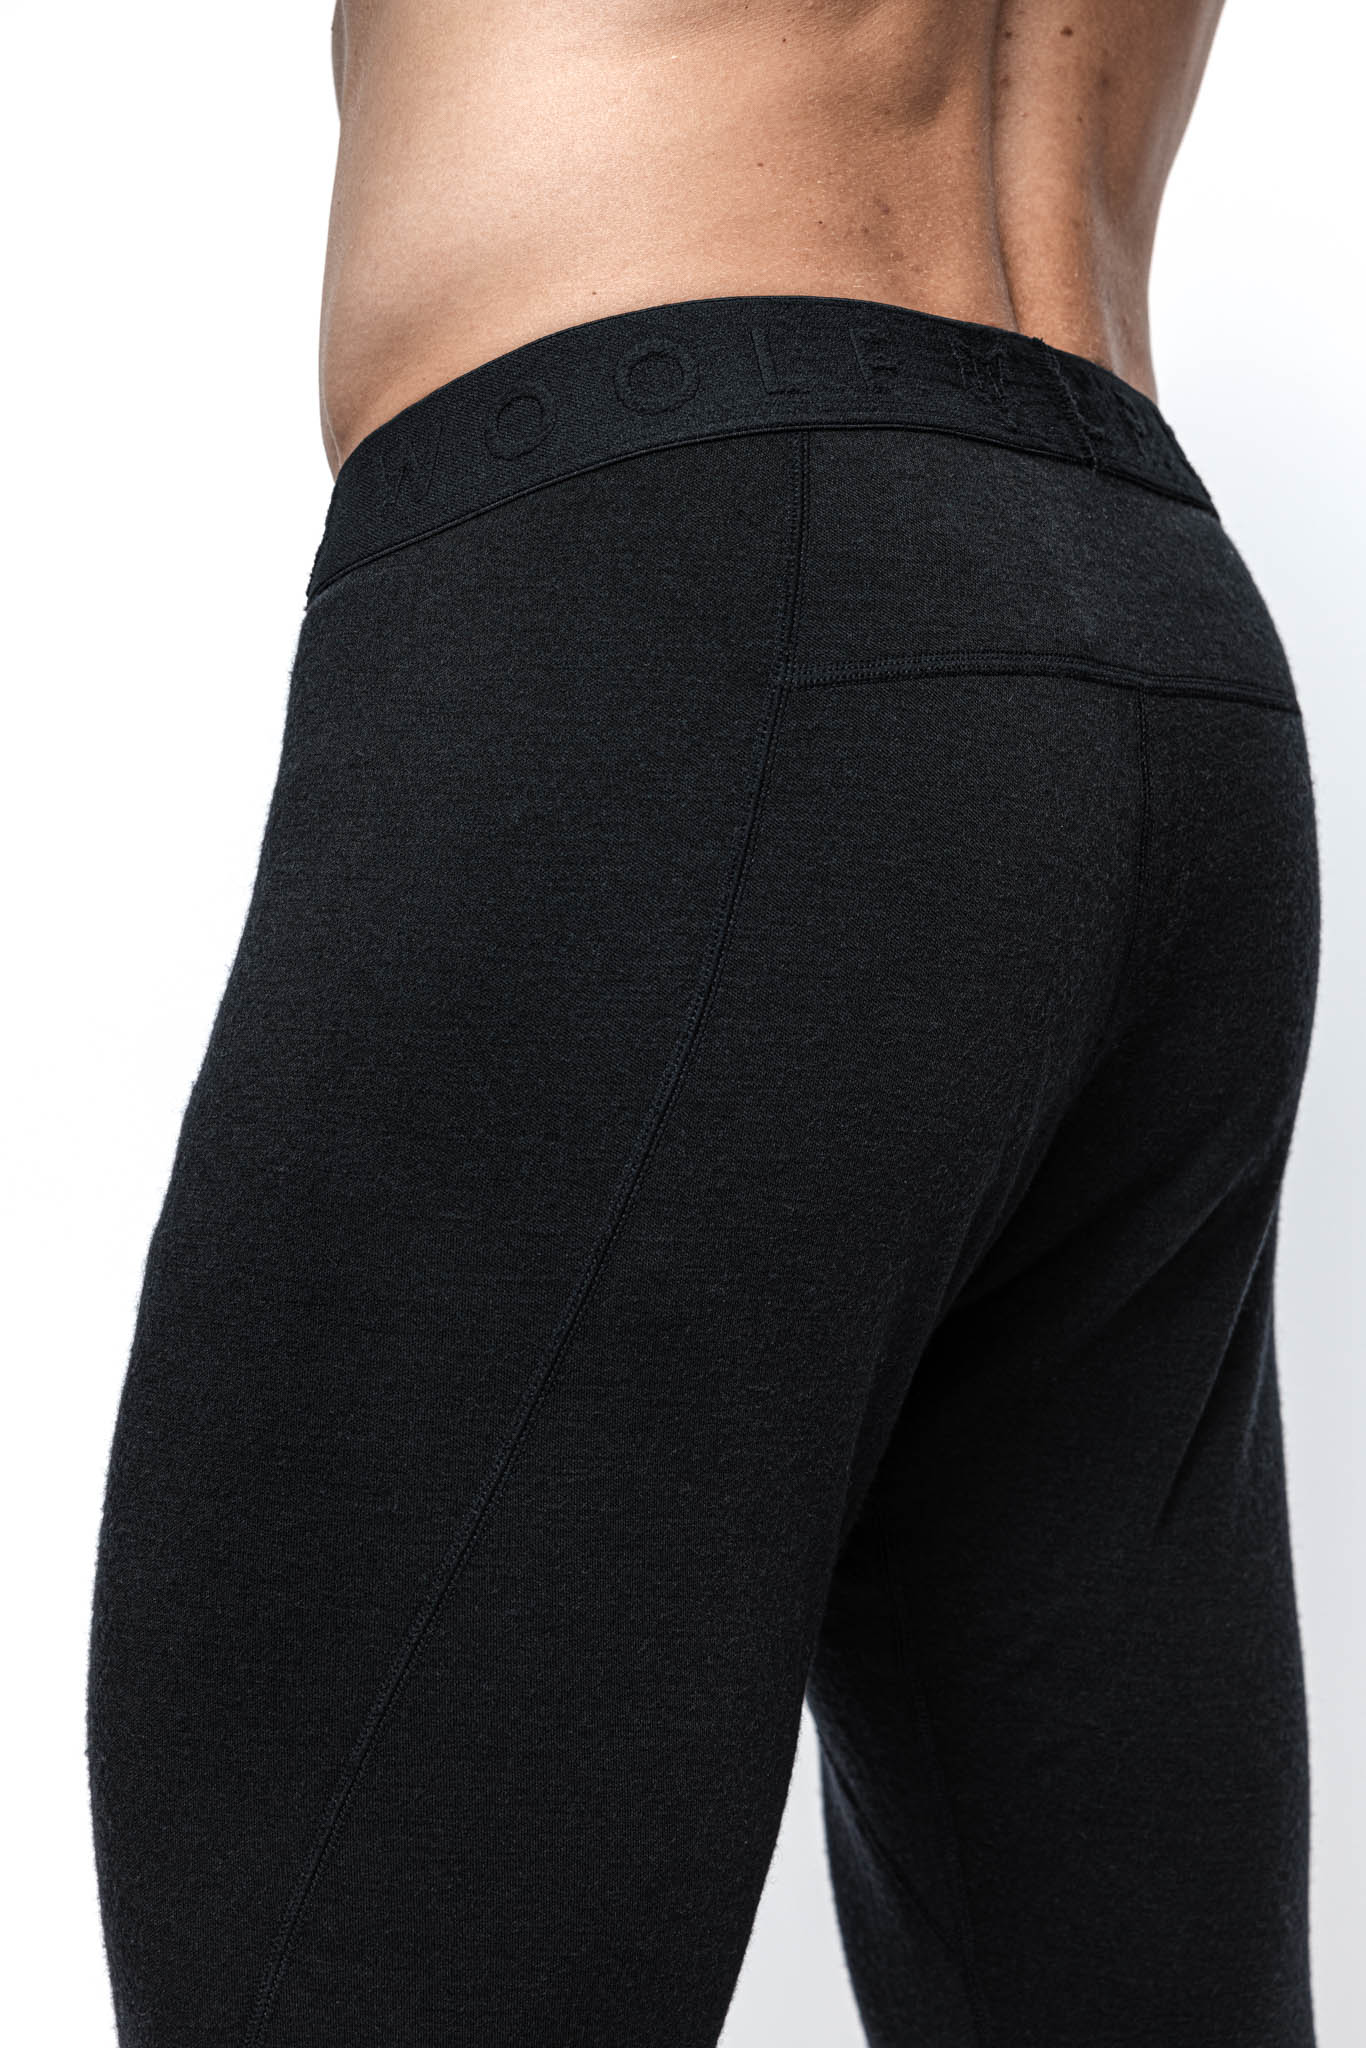 Merino Wool Base Layer Thermal Pants For Men And Women Warm, Breathable,  Soft And Comfortable Everyday Wear 231206 From Piao04, $27.6